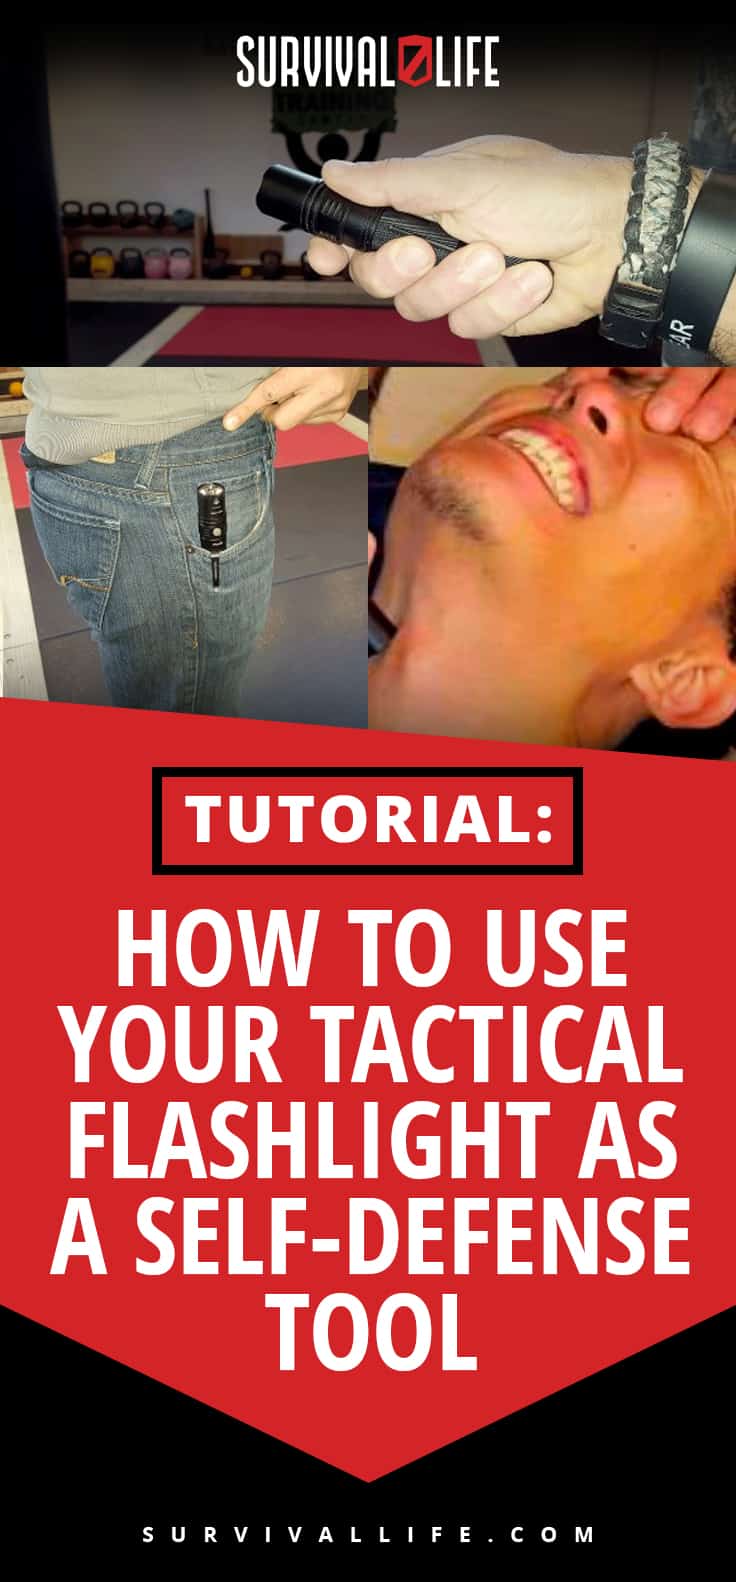 TUTORIAL: How To Use Your Tactical Flashlight As a Self-Defense Tool